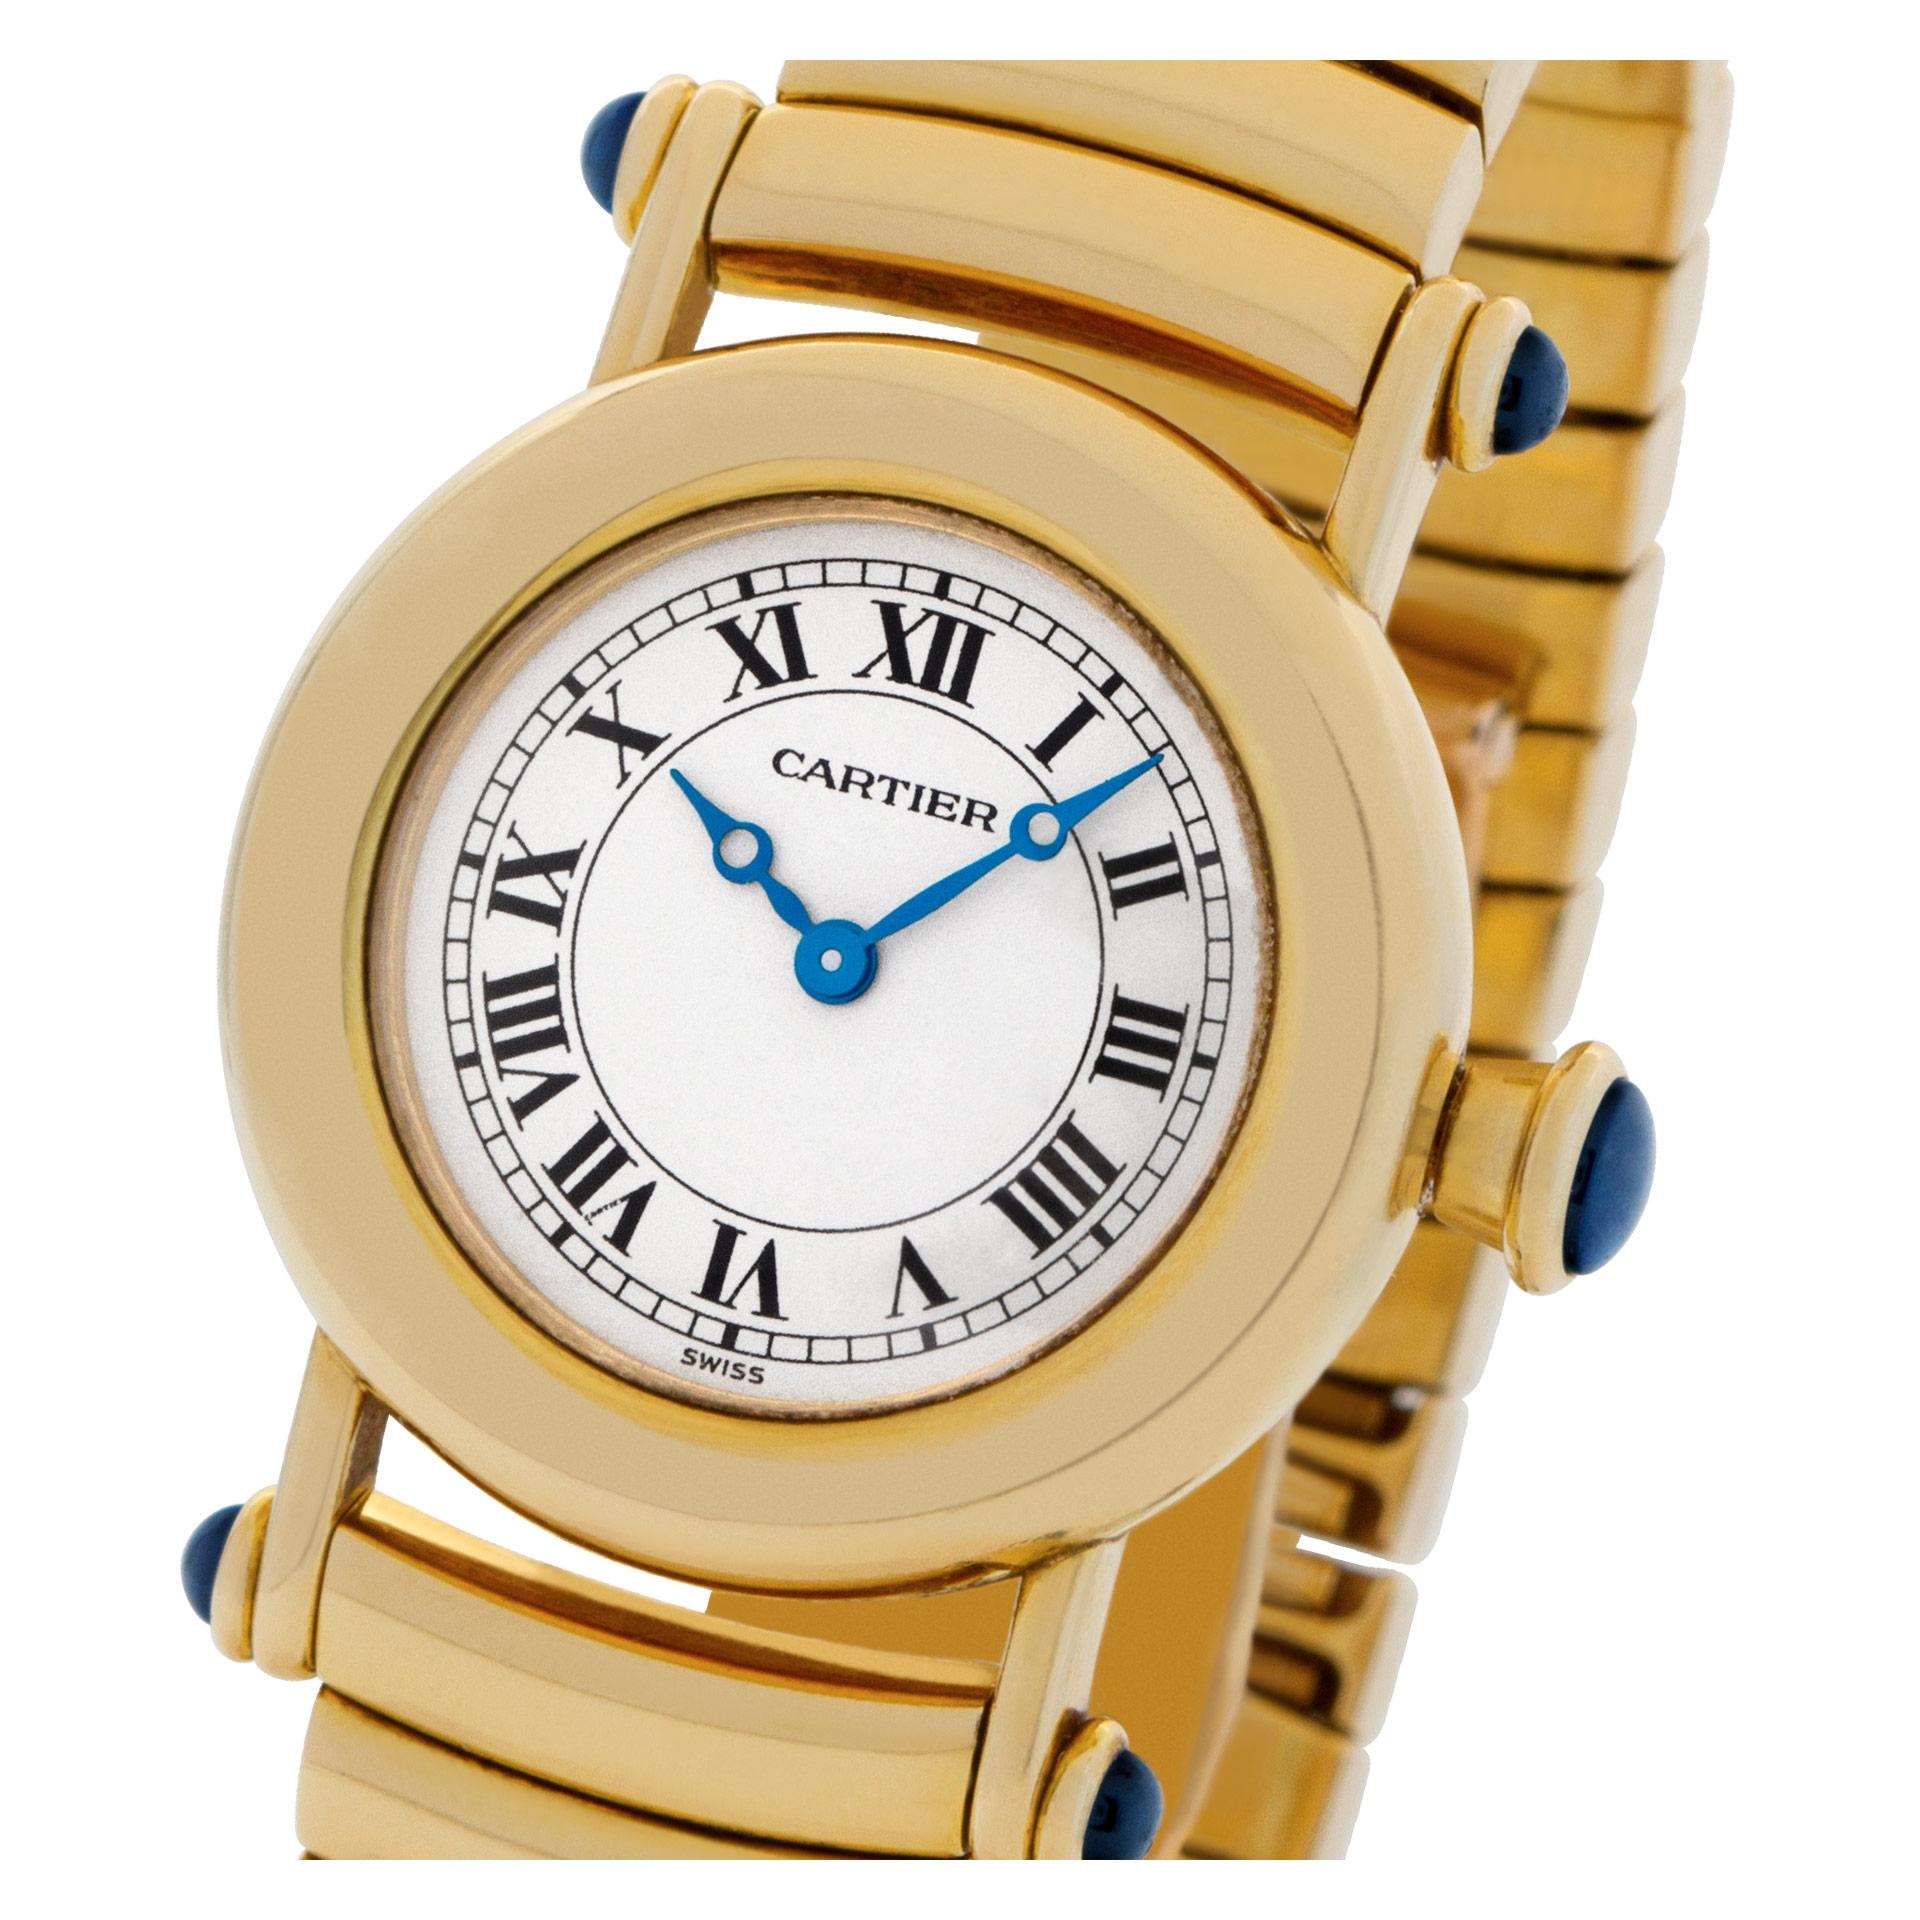  ESTIMATED RETAIL: $19,900   YOUR PRICE: $10,867.00 

Cartier Diabolo in 18k yellow gold with crown and lugs with cabochon sapphires. Quartz movement. 26 mm case diameter size (crown excluded). With box and papers. Ref 1440. Circa 1996. Fine